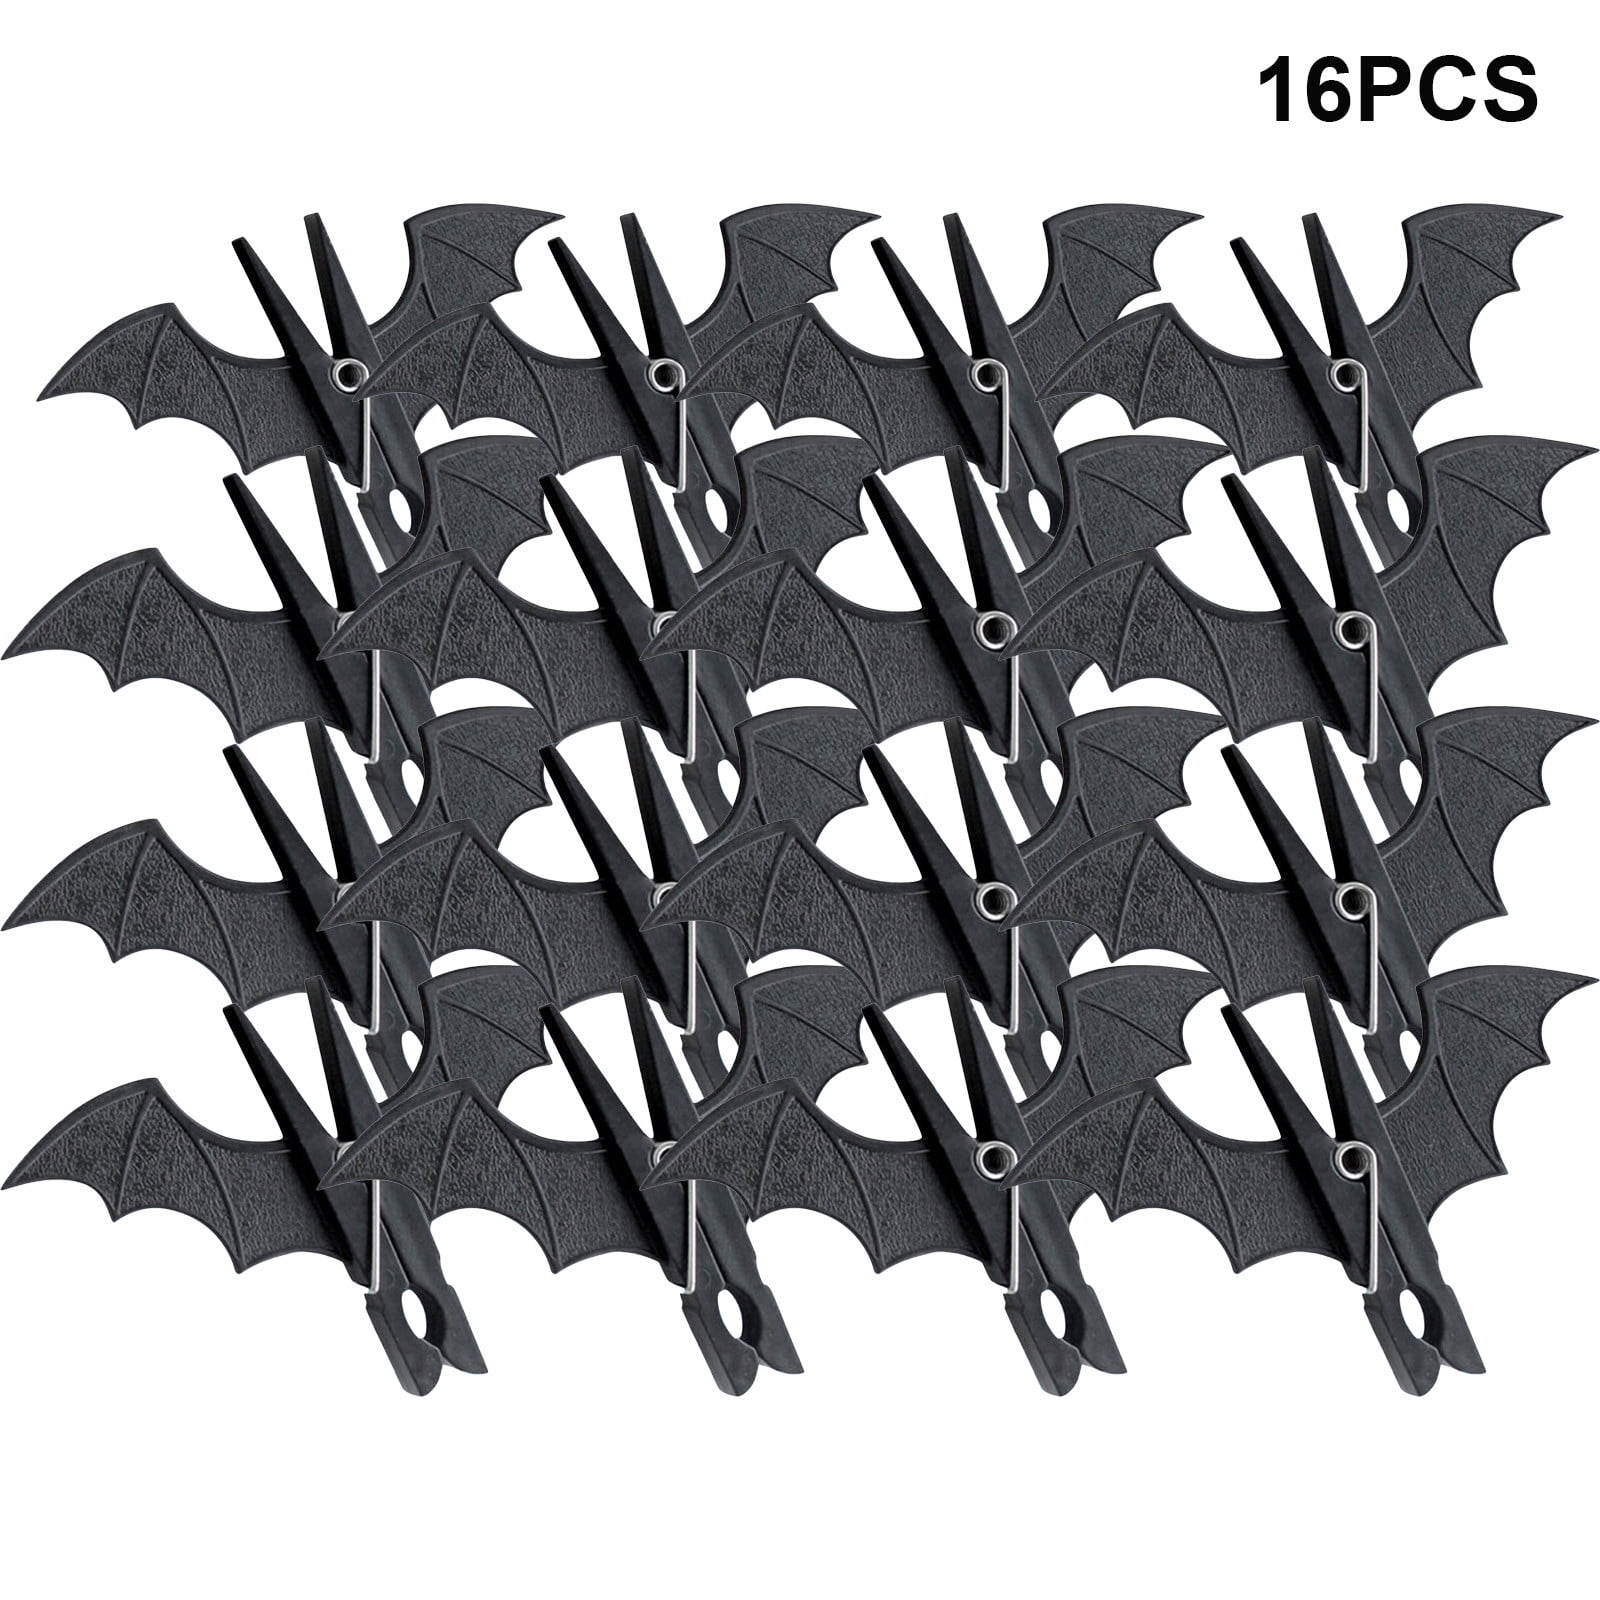 Zeceouar Clearance Items 16pcs Halloween Black Clothes Pins,Windproof Non  Slip Clothesline Clips,Bats Clothes Clips,Black Plastic Clothespin For  Hanging Clothes Drying Outdoor 